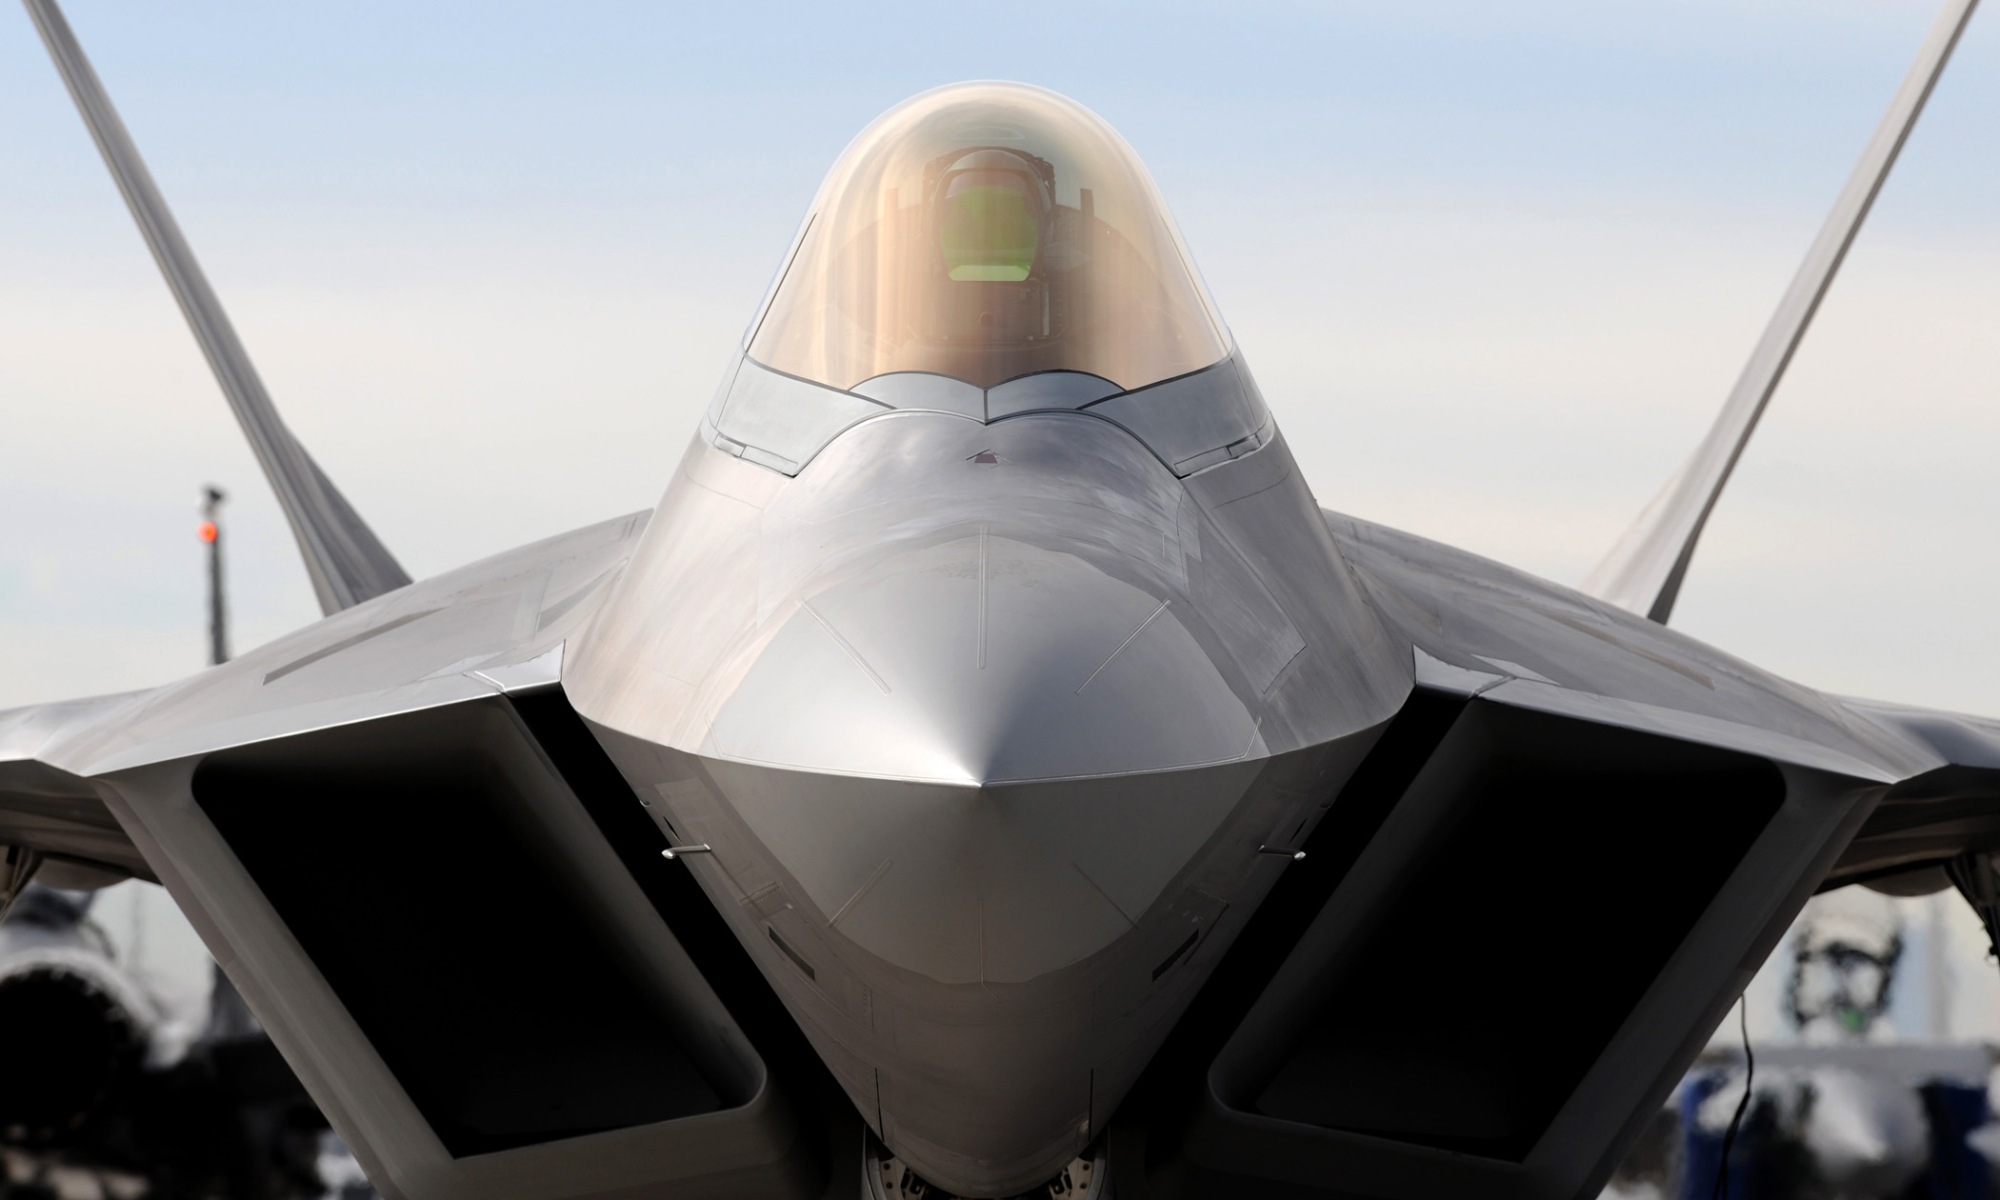 This is why F-22 Technology still remains the Most Dangerous Ever